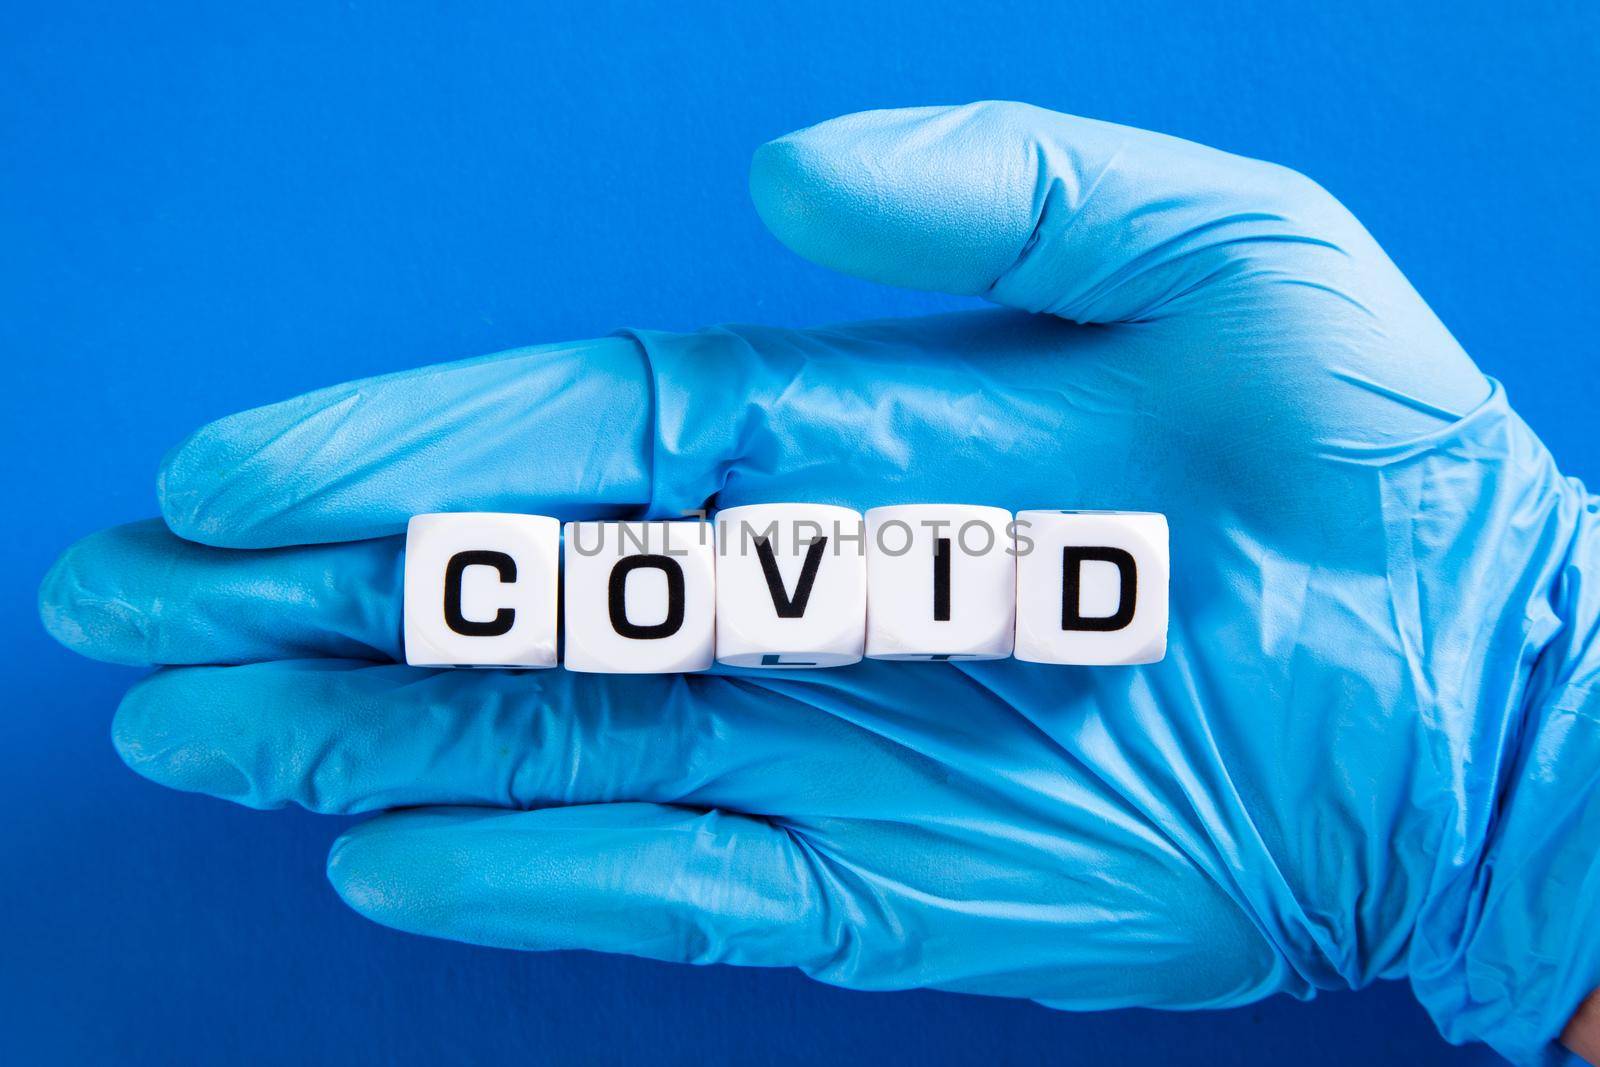 Hand in blue glove with Covid word. COVID-19 pandemic concept. by tehcheesiong